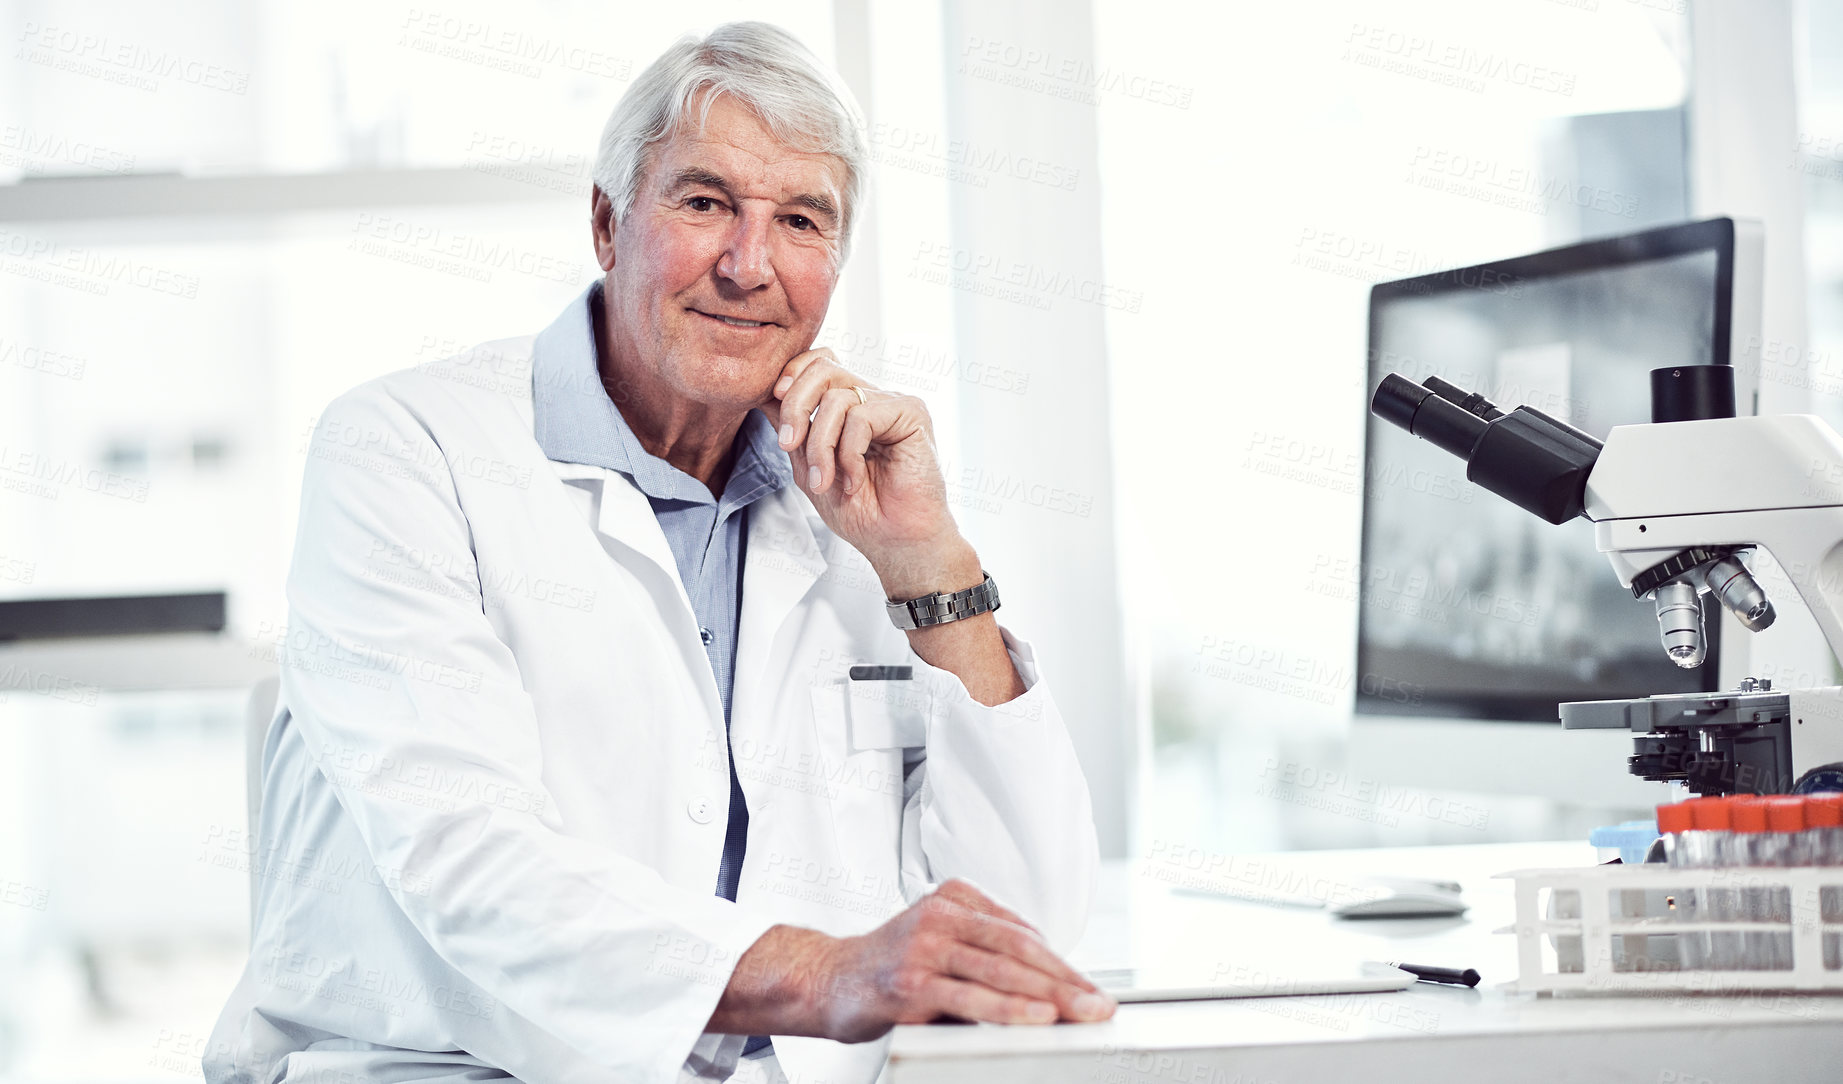 Buy stock photo Portrait of a cheerful elderly male scientist making notes while looking into the camera and being seated inside a laboratory